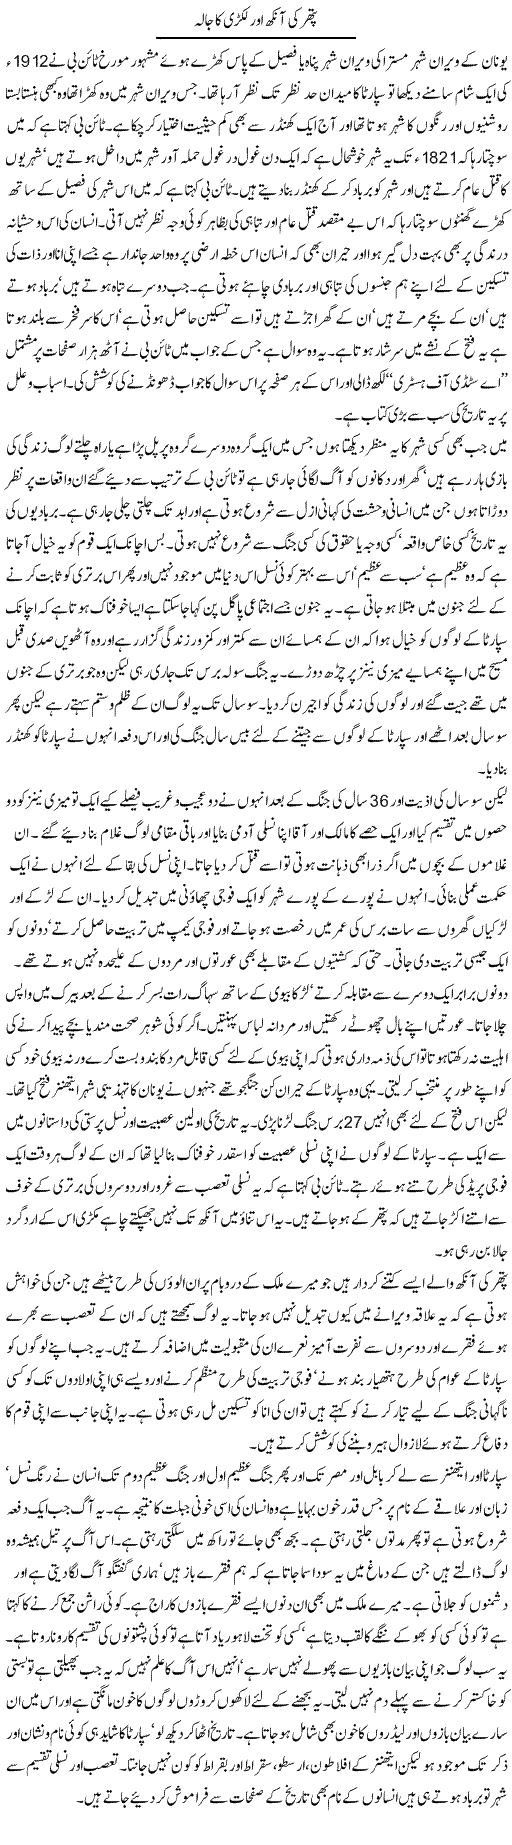 Cities in History Express Column Orya Maqbool 13 August 2011